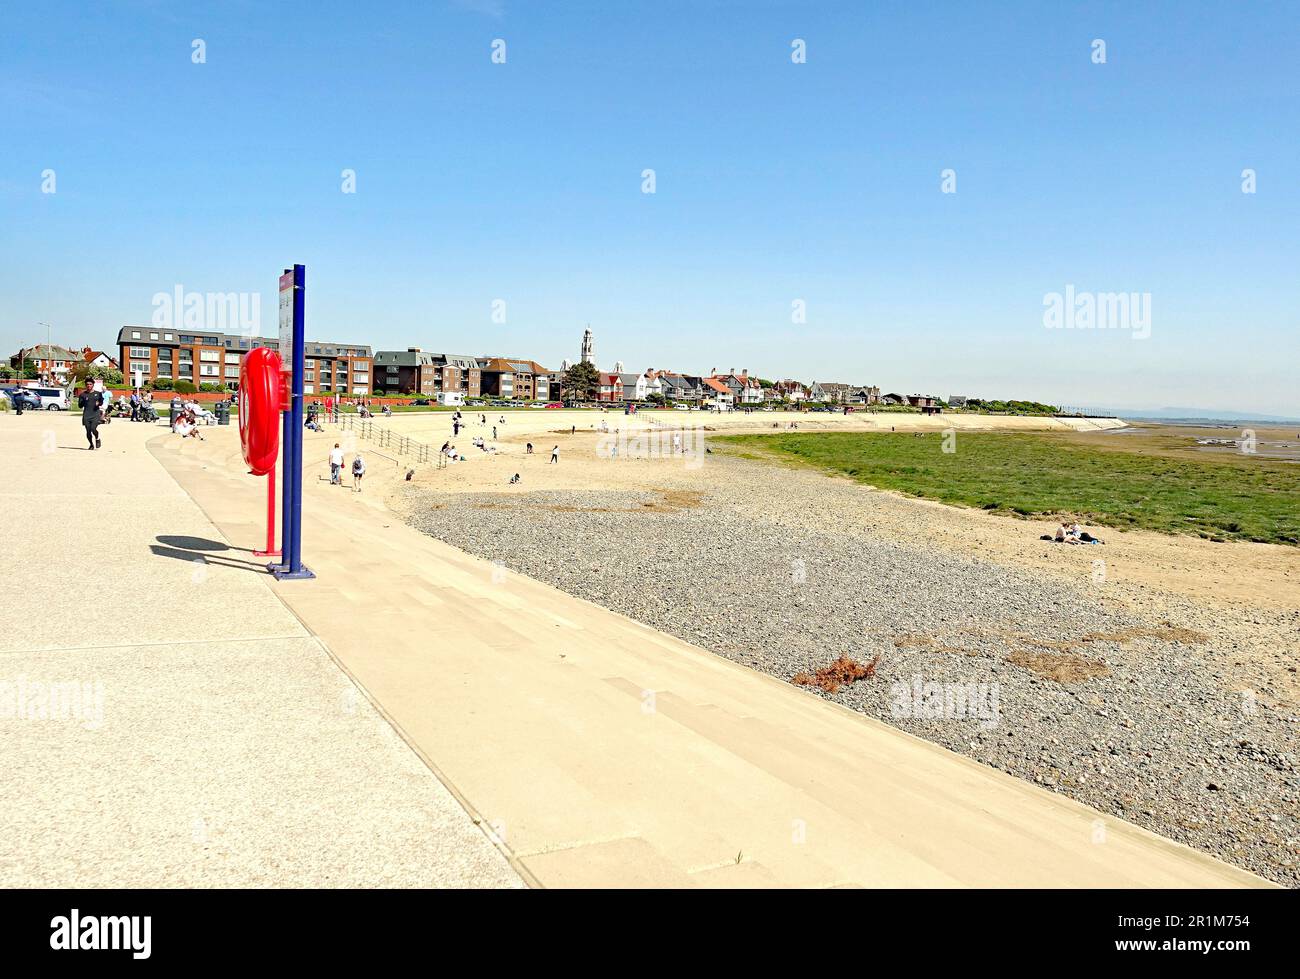 New promenade and sea defences at Stanner Bank, better known locally as Granny's Bay, a popular spot between Lytham and St Annes, Lancashire Stock Photo